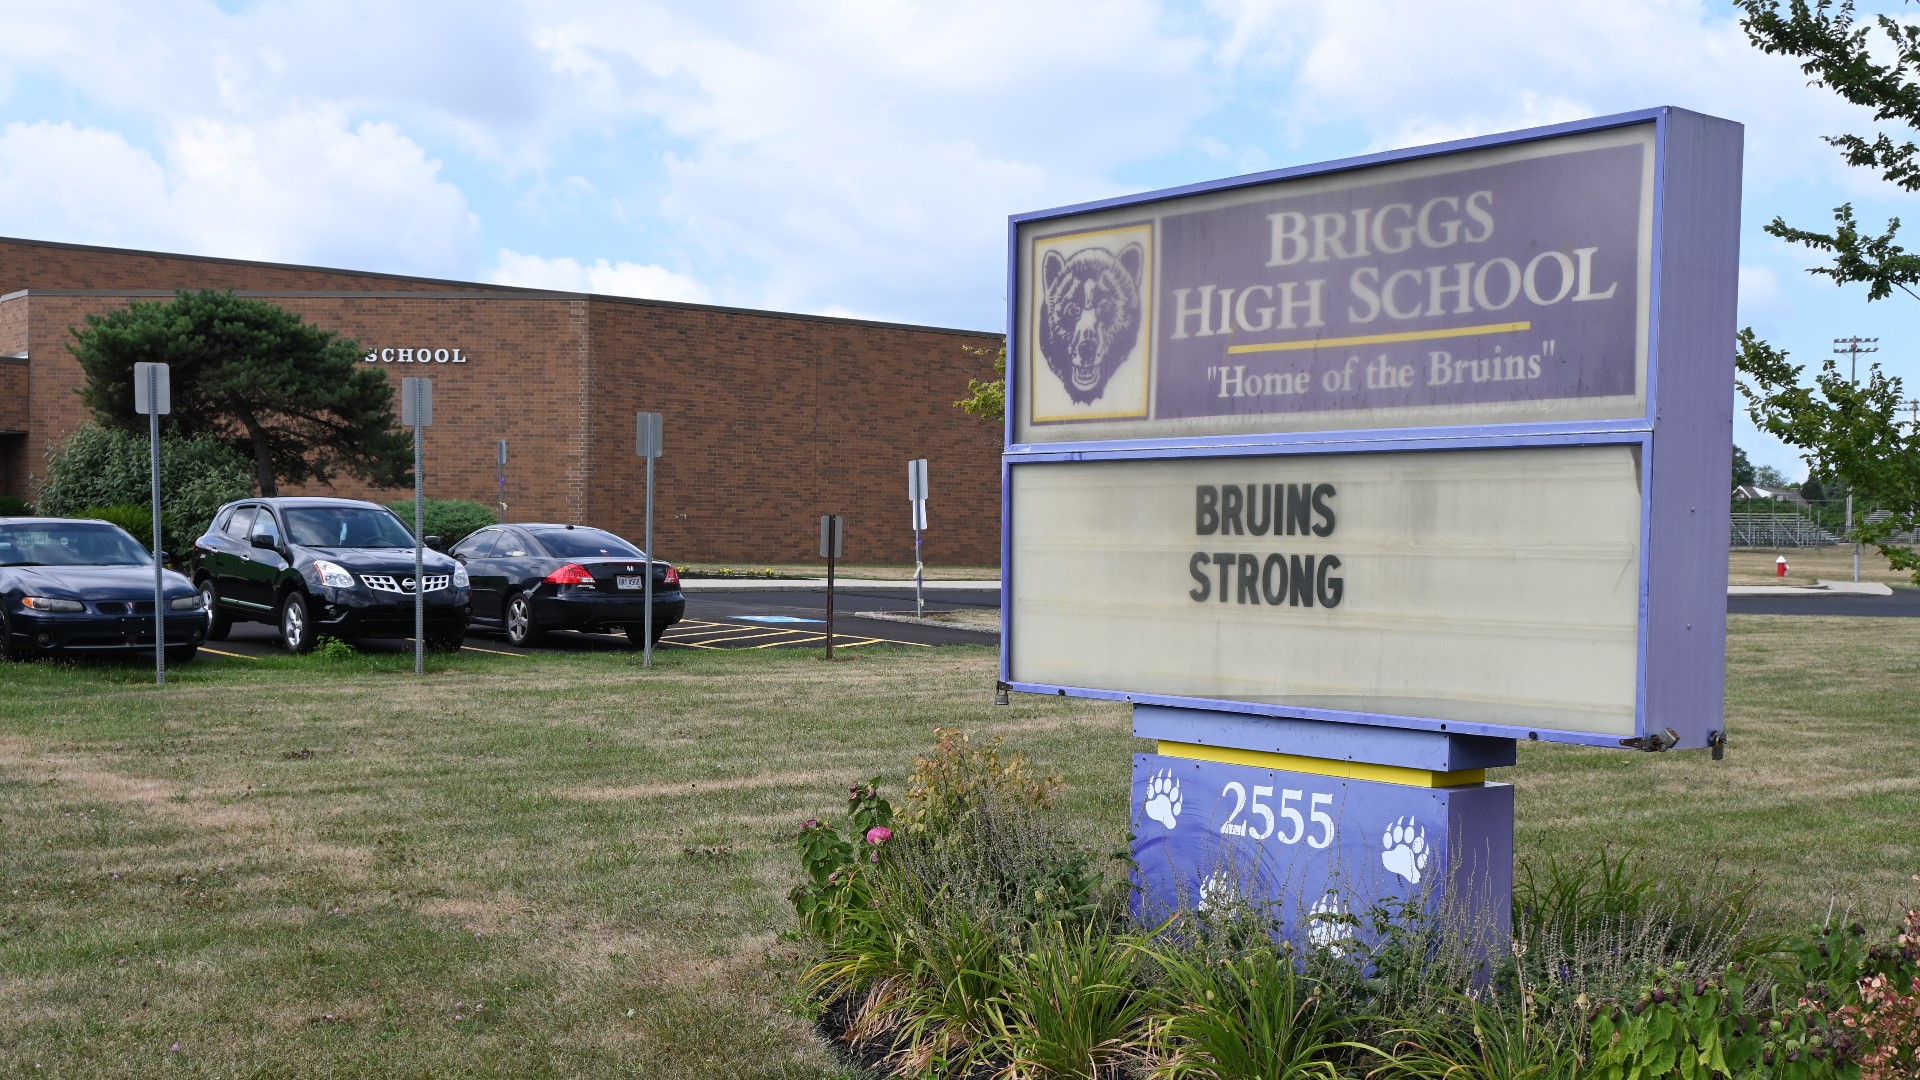 According to police, school staff received information from other students about the 15-year-old bragging about having a handgun inside his backpack.